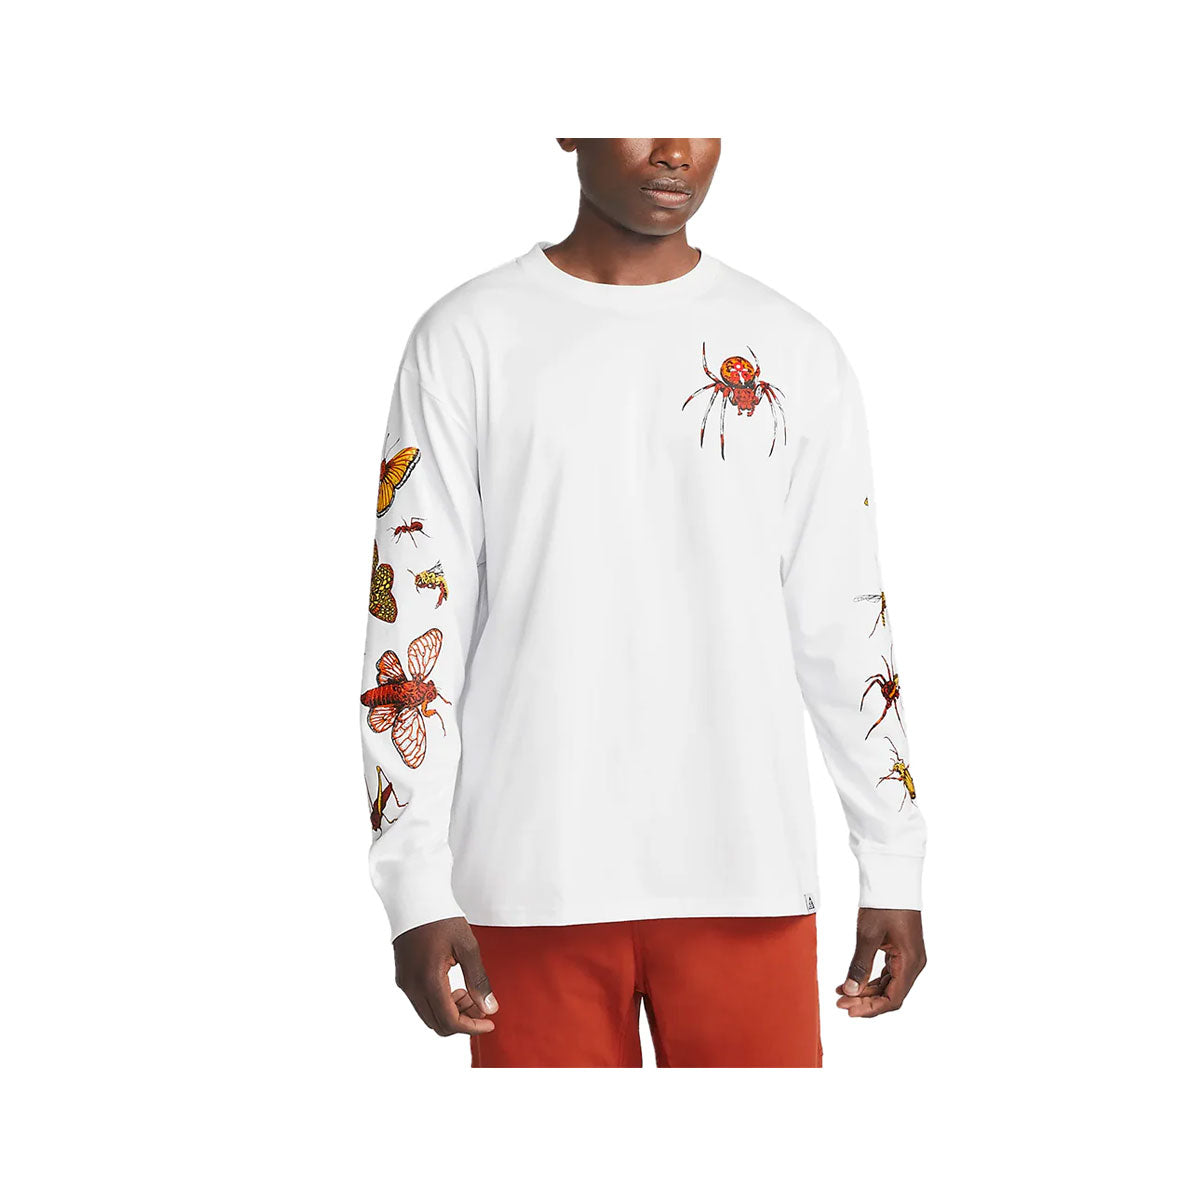 Nike Men's ACG Insects Graphic Long-Sleeve